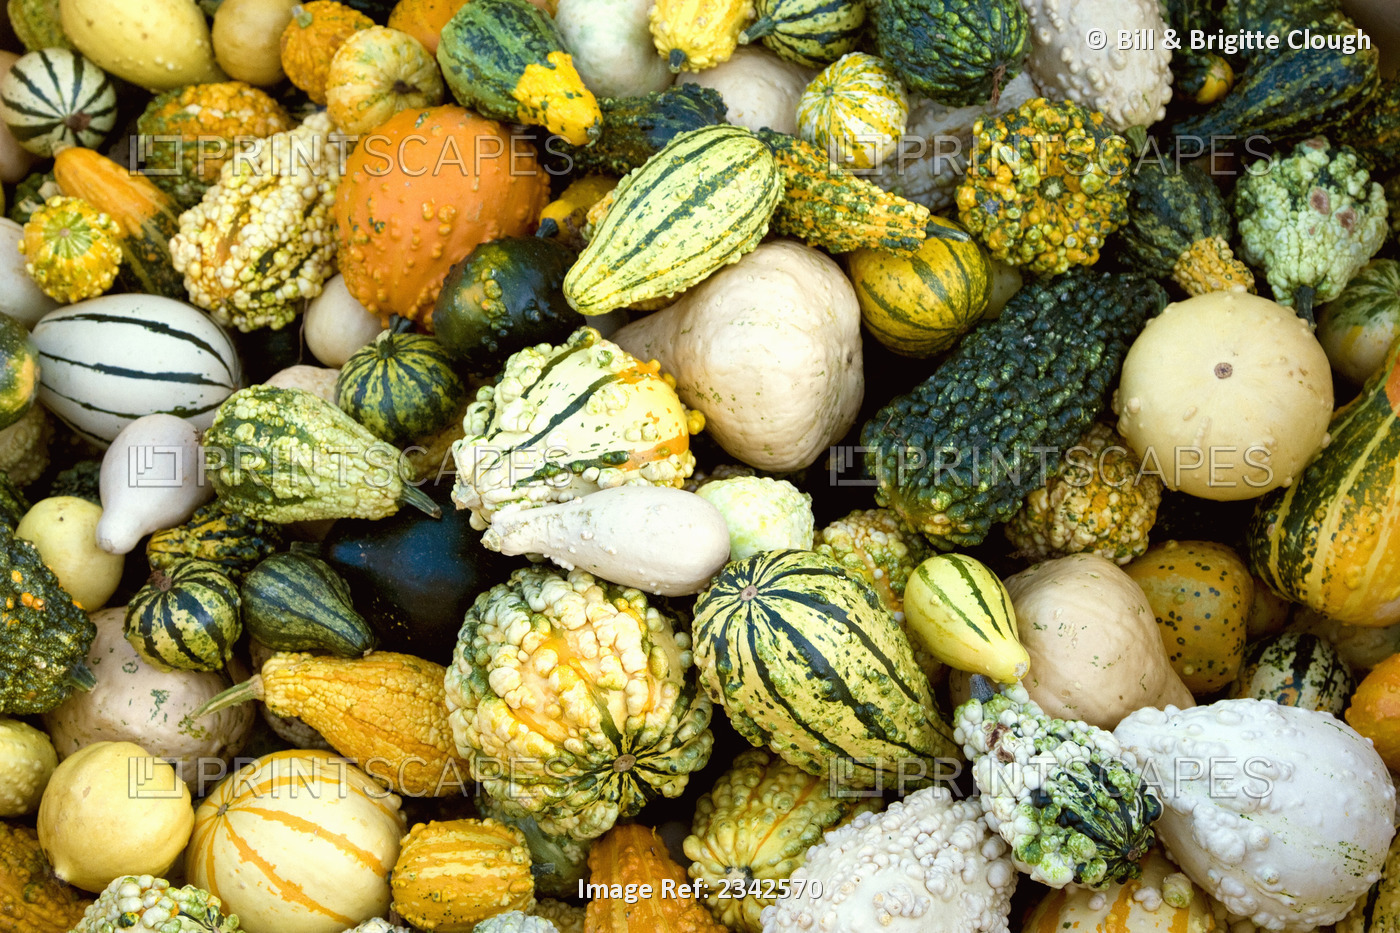 Agriculture - Grouping of mixed gourds / California, USA.